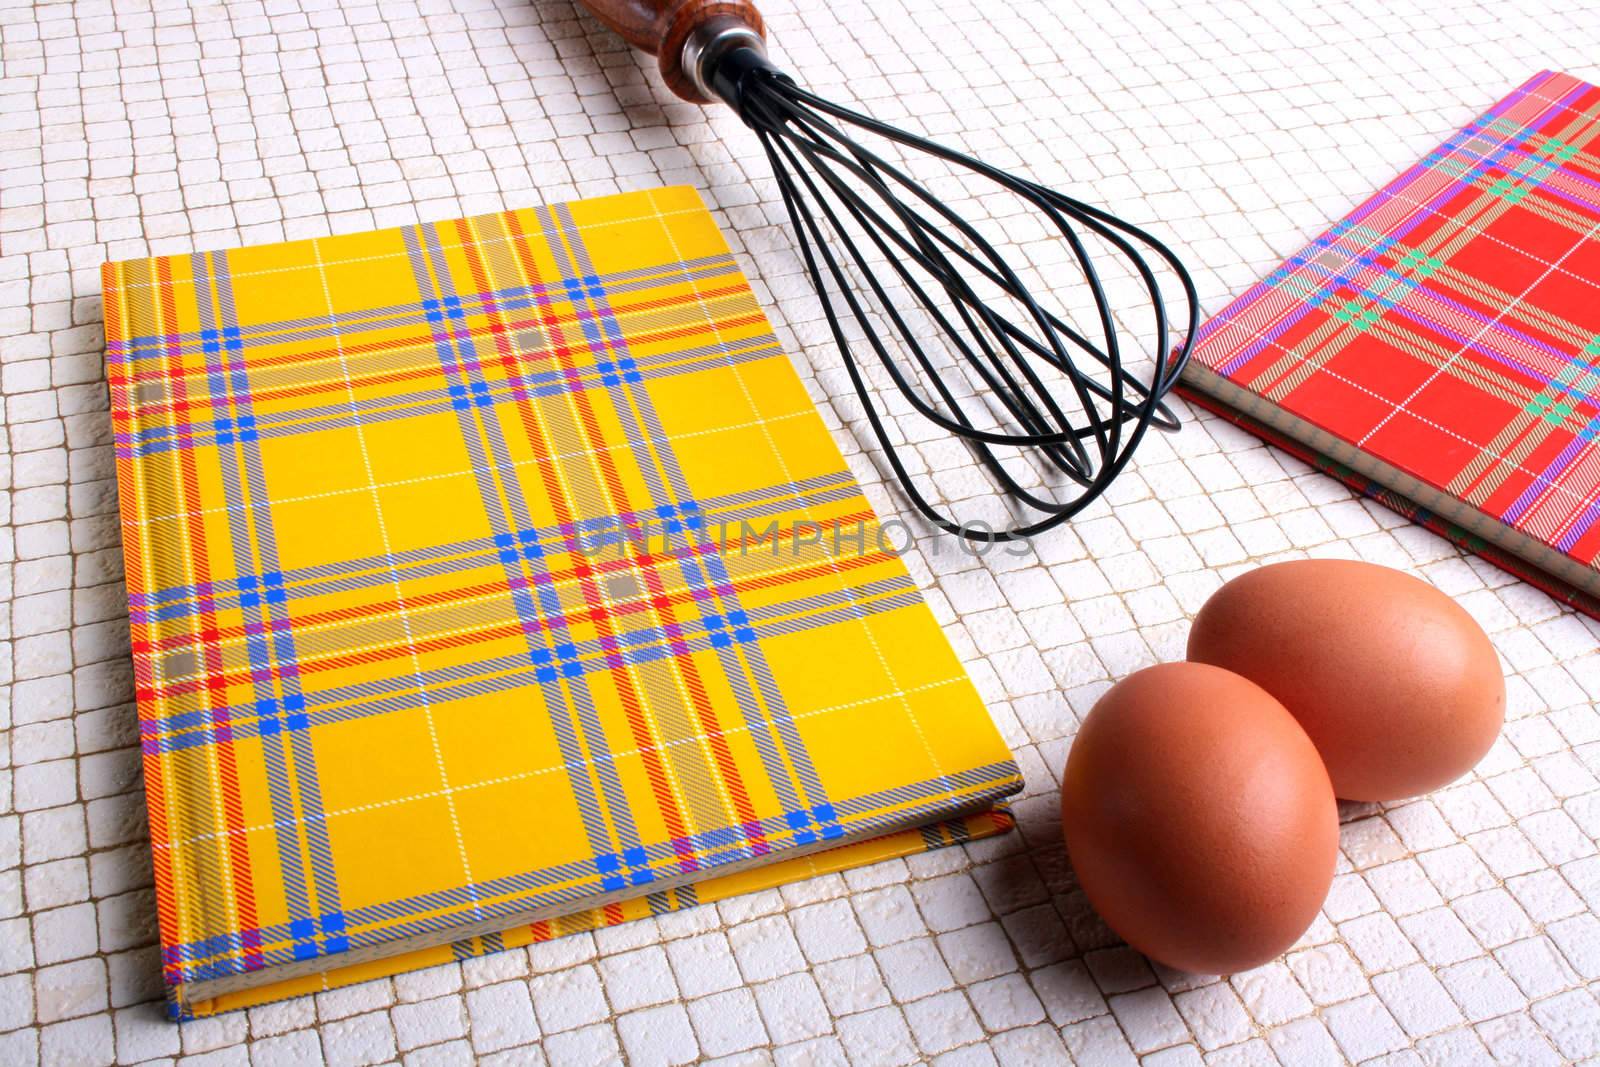 Two books for recipes on a kitchen table with eggs and a beater.